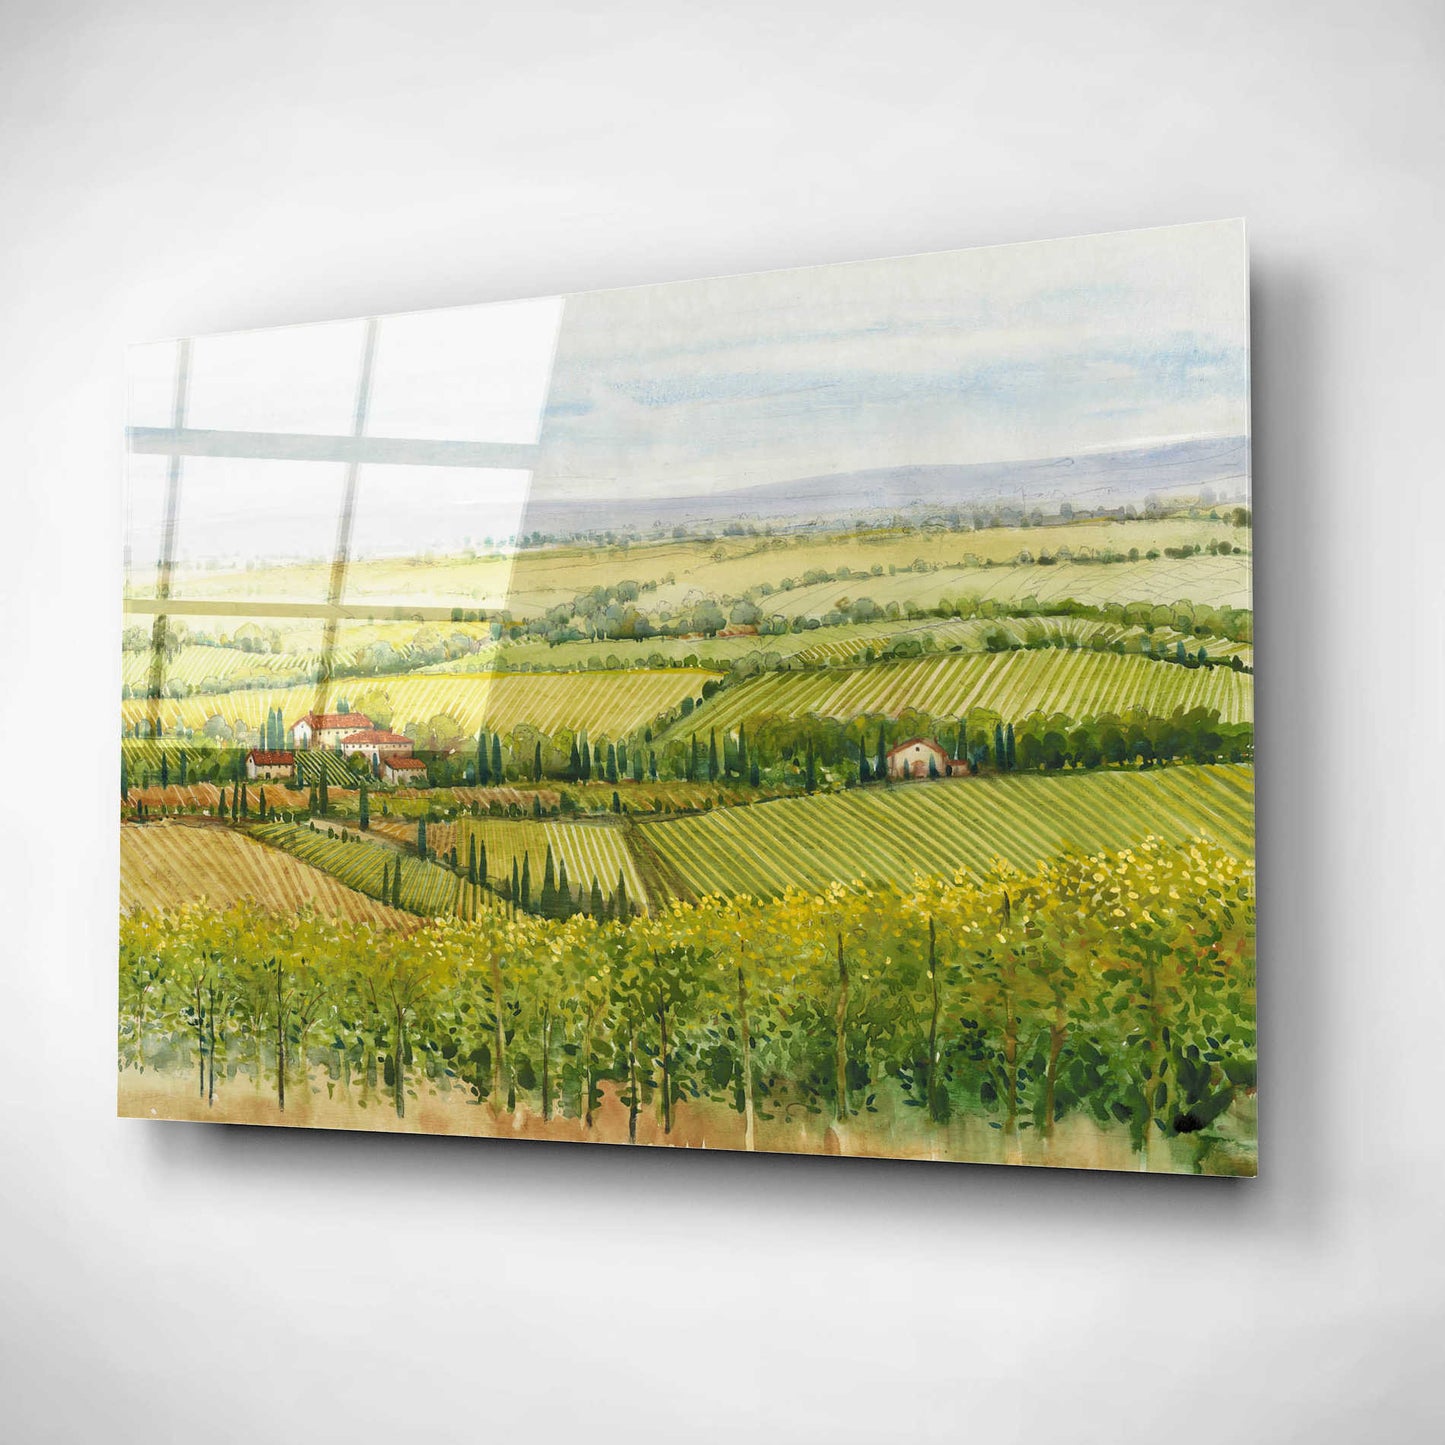 Epic Art 'Wine Country View I' by Tim O'Toole, Acrylic Glass Wall Art,16x12